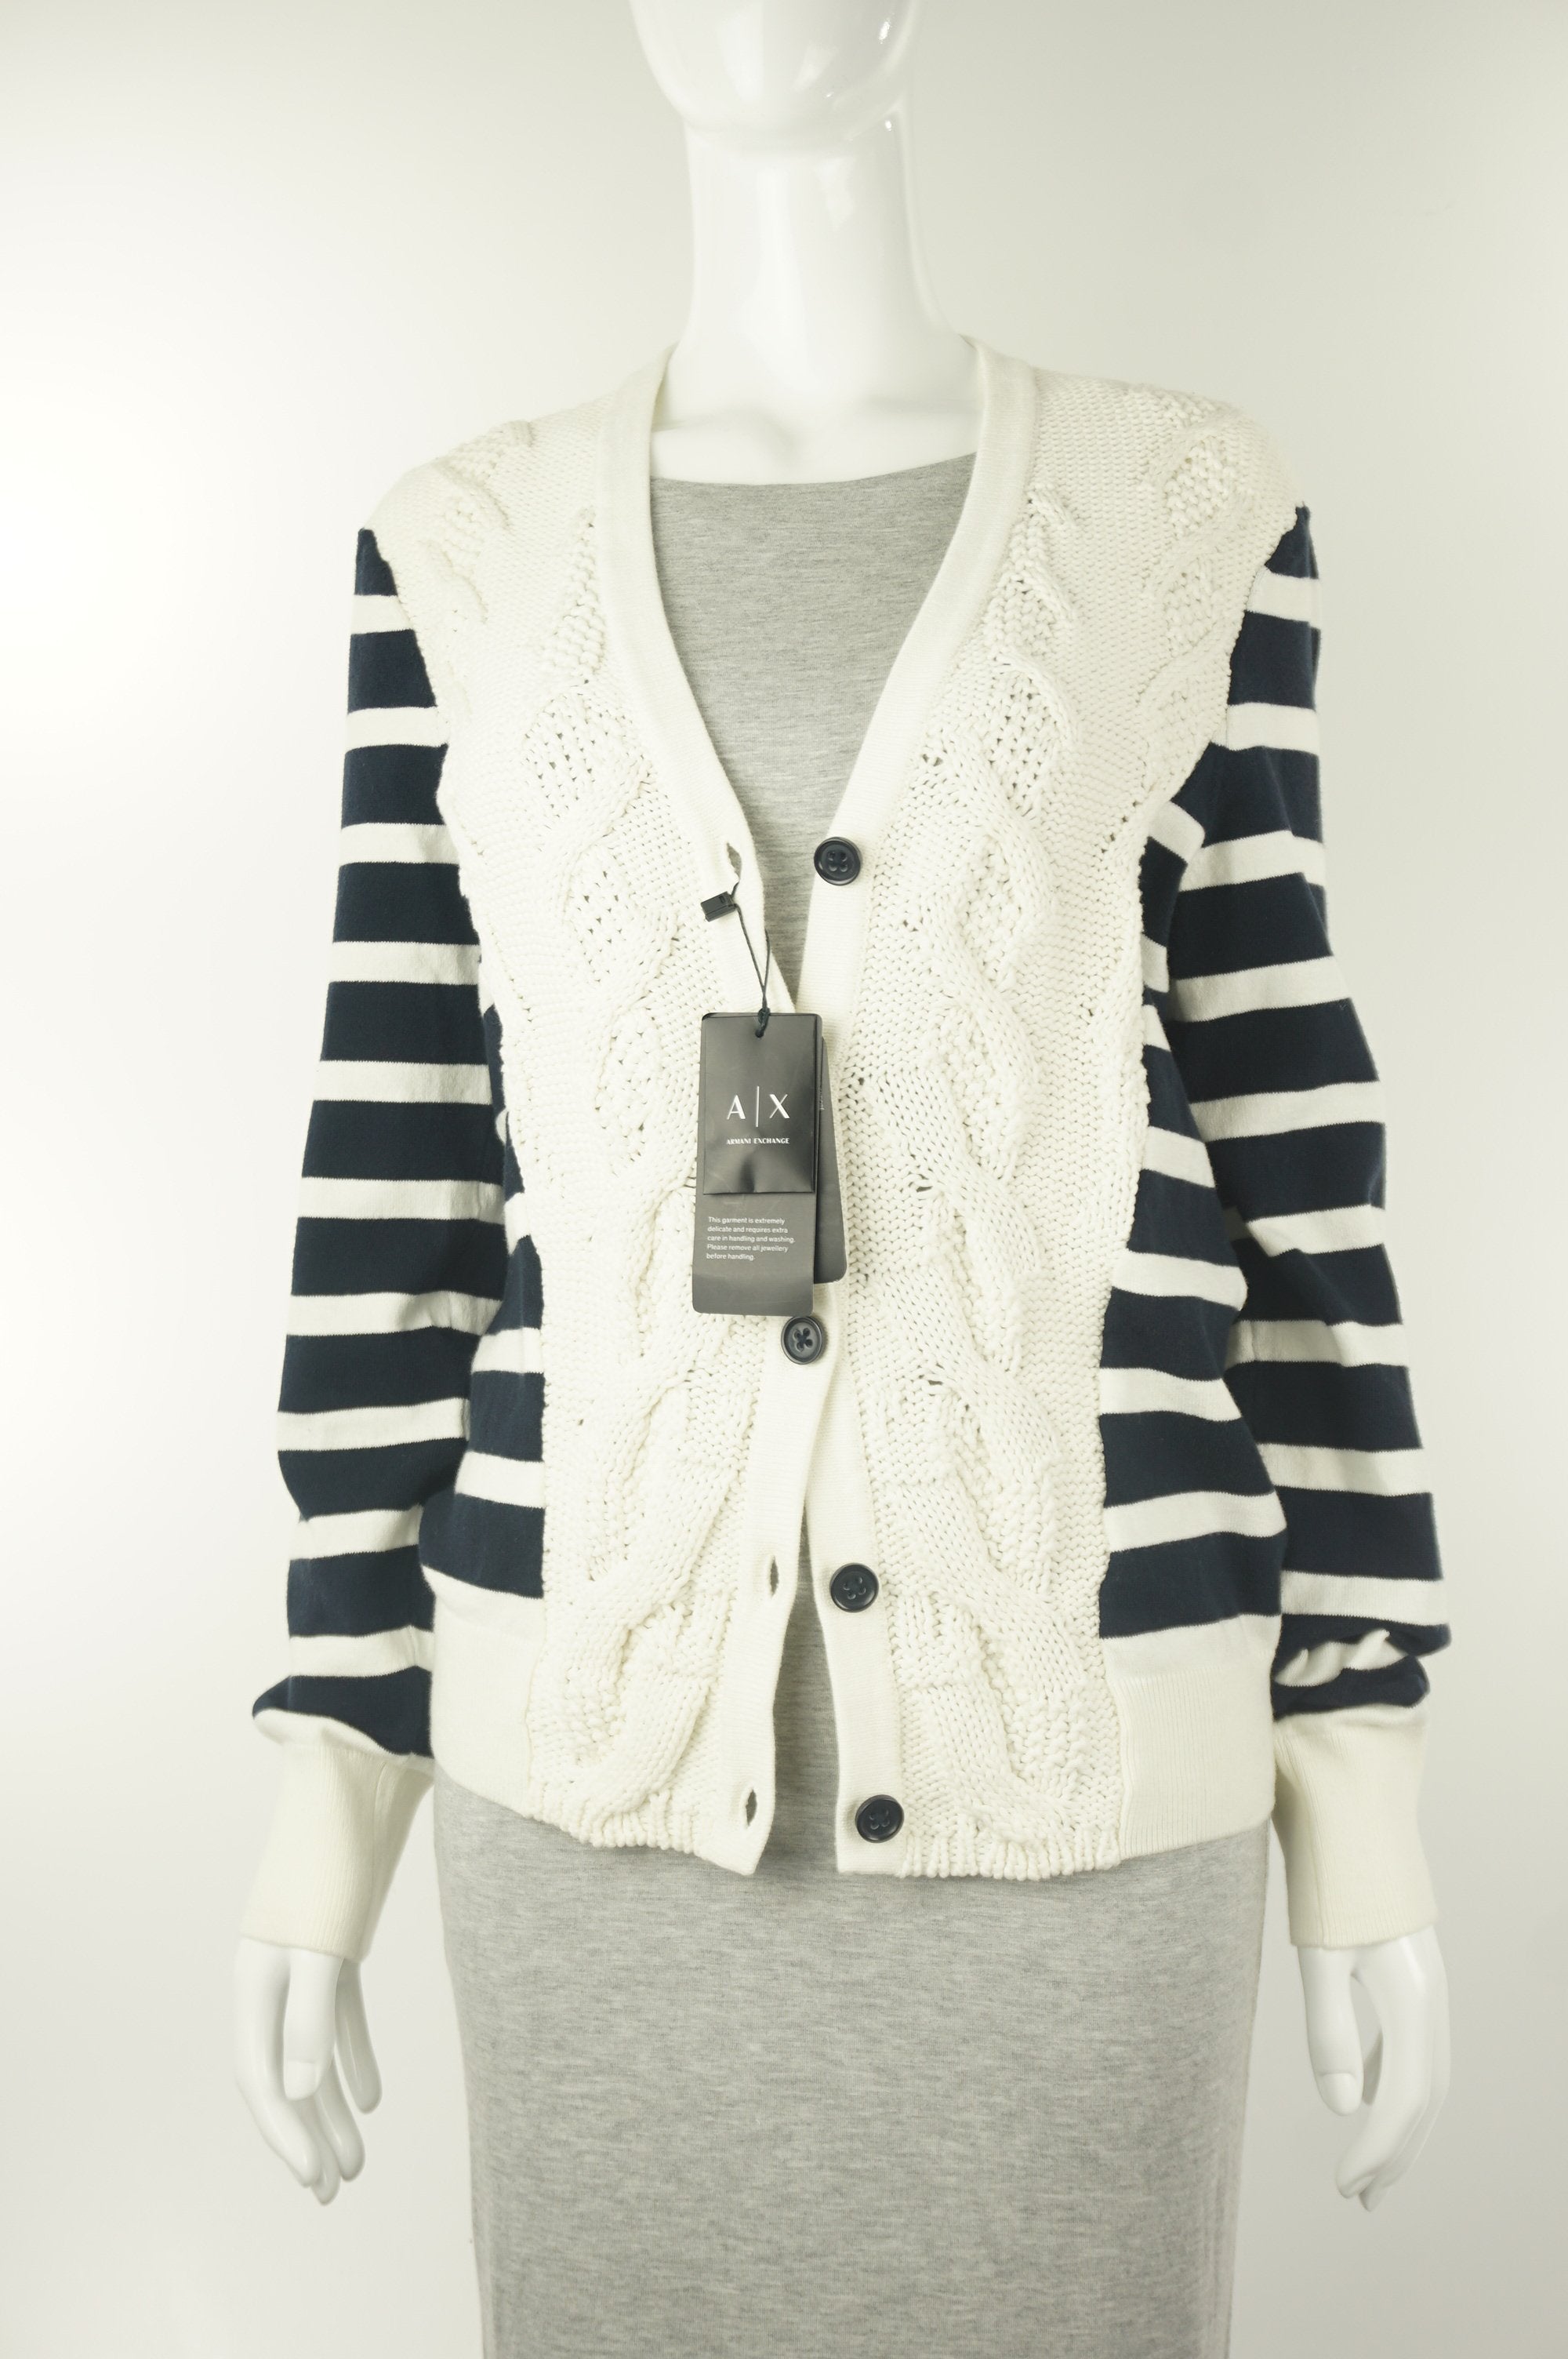 A|X Armani Exchange Short Cardigan, Knitted cardigan from A|X. Tag still on., Blue, White, 80% cotton, 18% polyamide, 2% elastane, women's Jackets & Coats, women's Blue, White Jackets & Coats, A|X Armani Exchange women's Jackets & Coats, armarni exchange cardigan, women's cardigan